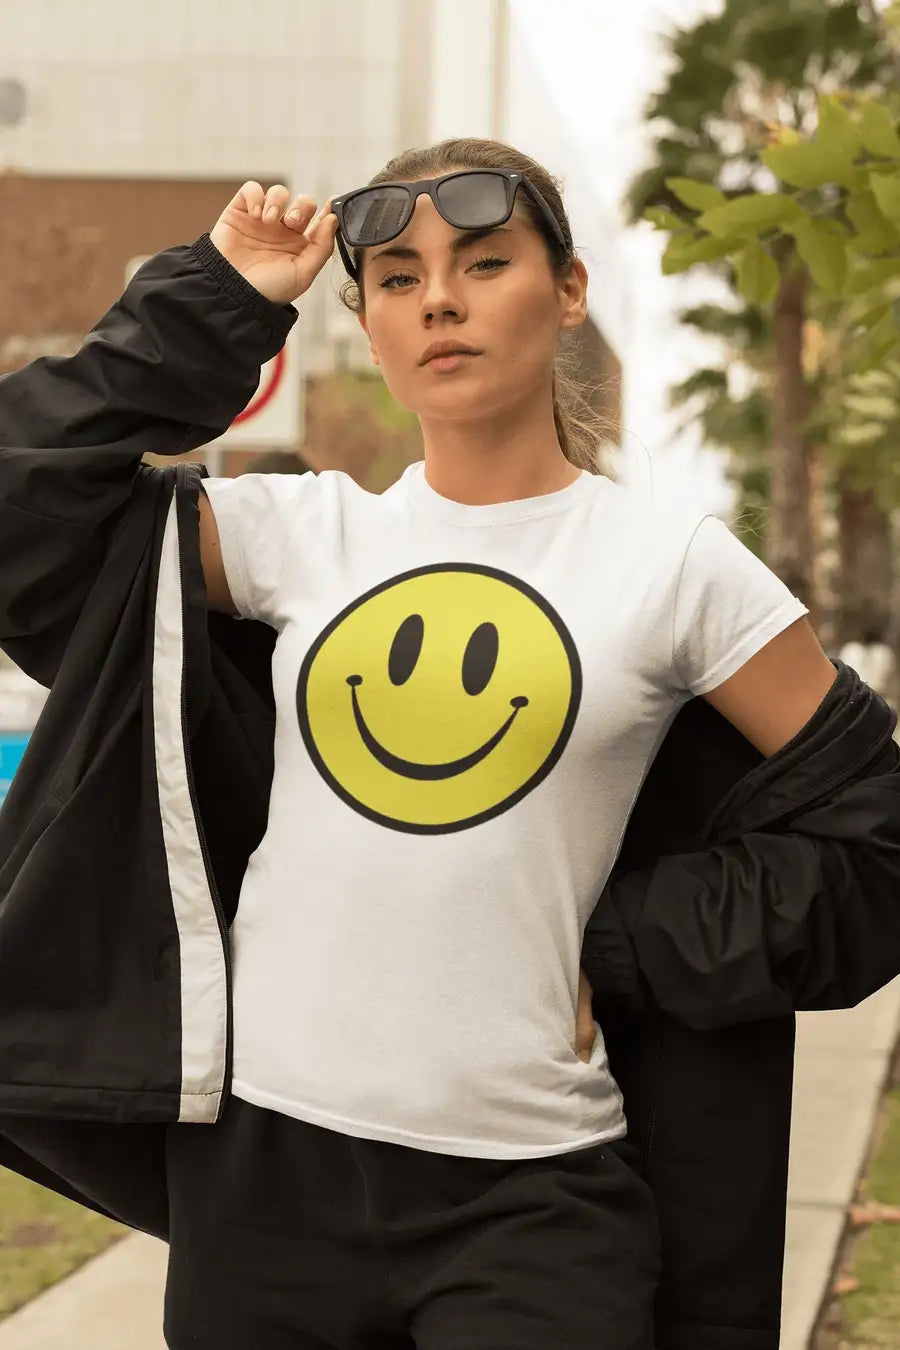 Smiley Face White T Shirt for Men and Women | Premium Design | Catch My Drift India - Catch My Drift India Clothing clothing, general, gym, made in india, shirt, t shirt, trending, tshirt